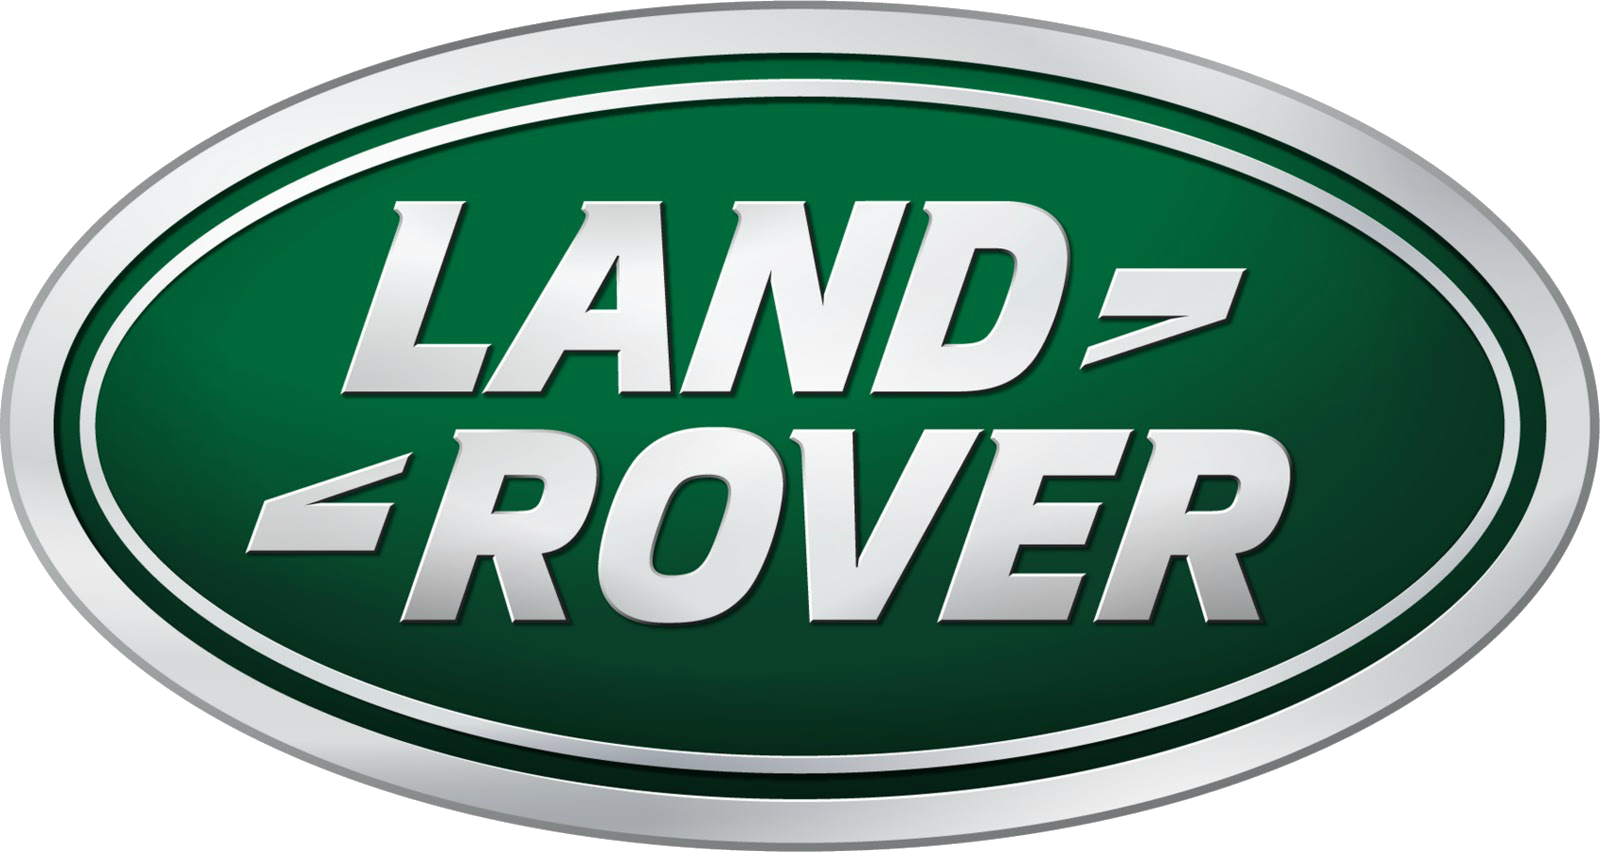 Land Rover Logo, Land Rover Car Symbol Meaning and History.